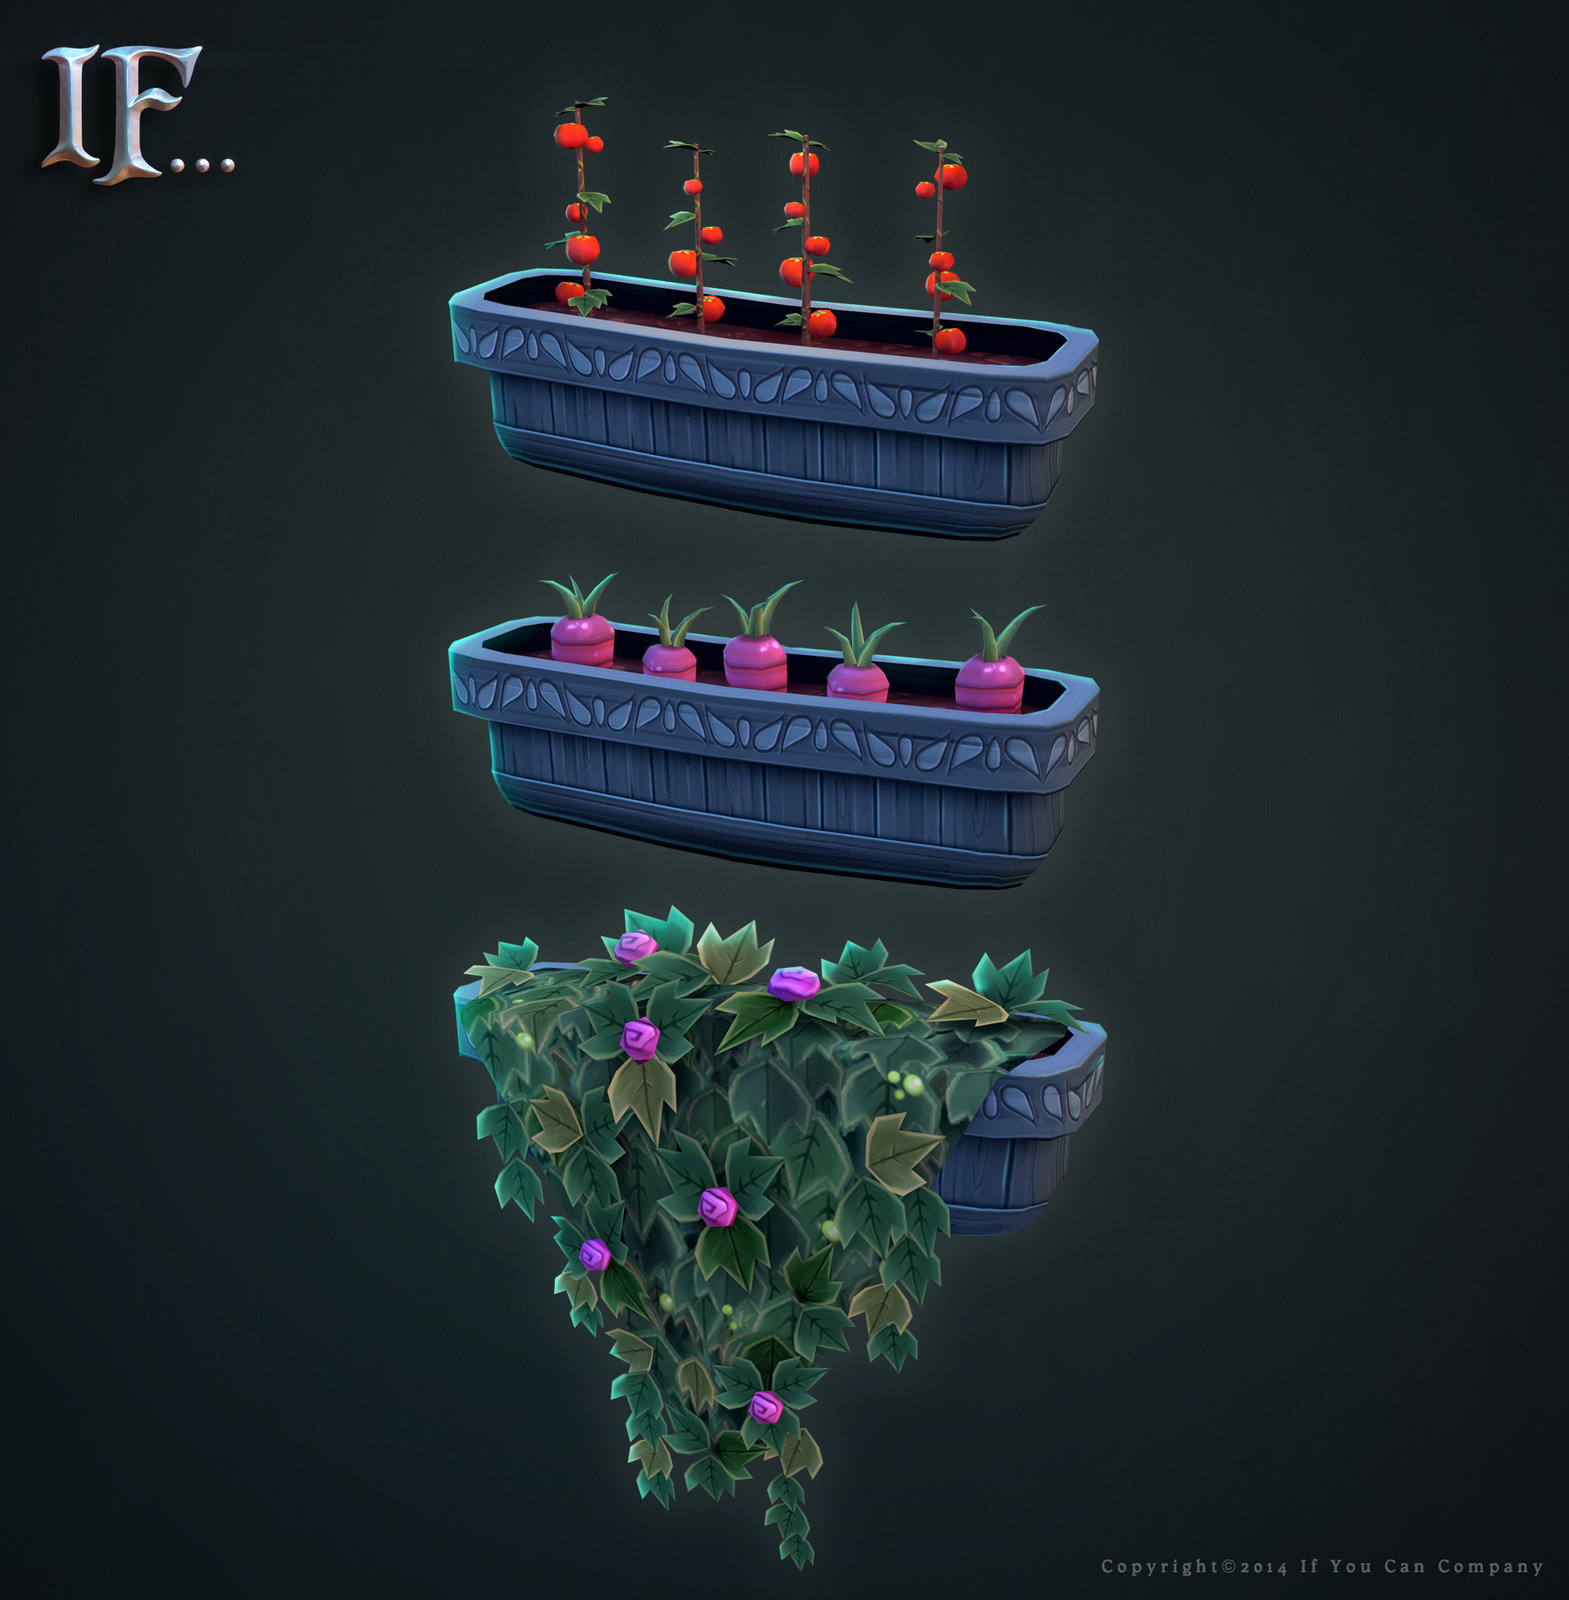 Imago plant pots modeled and textured by me